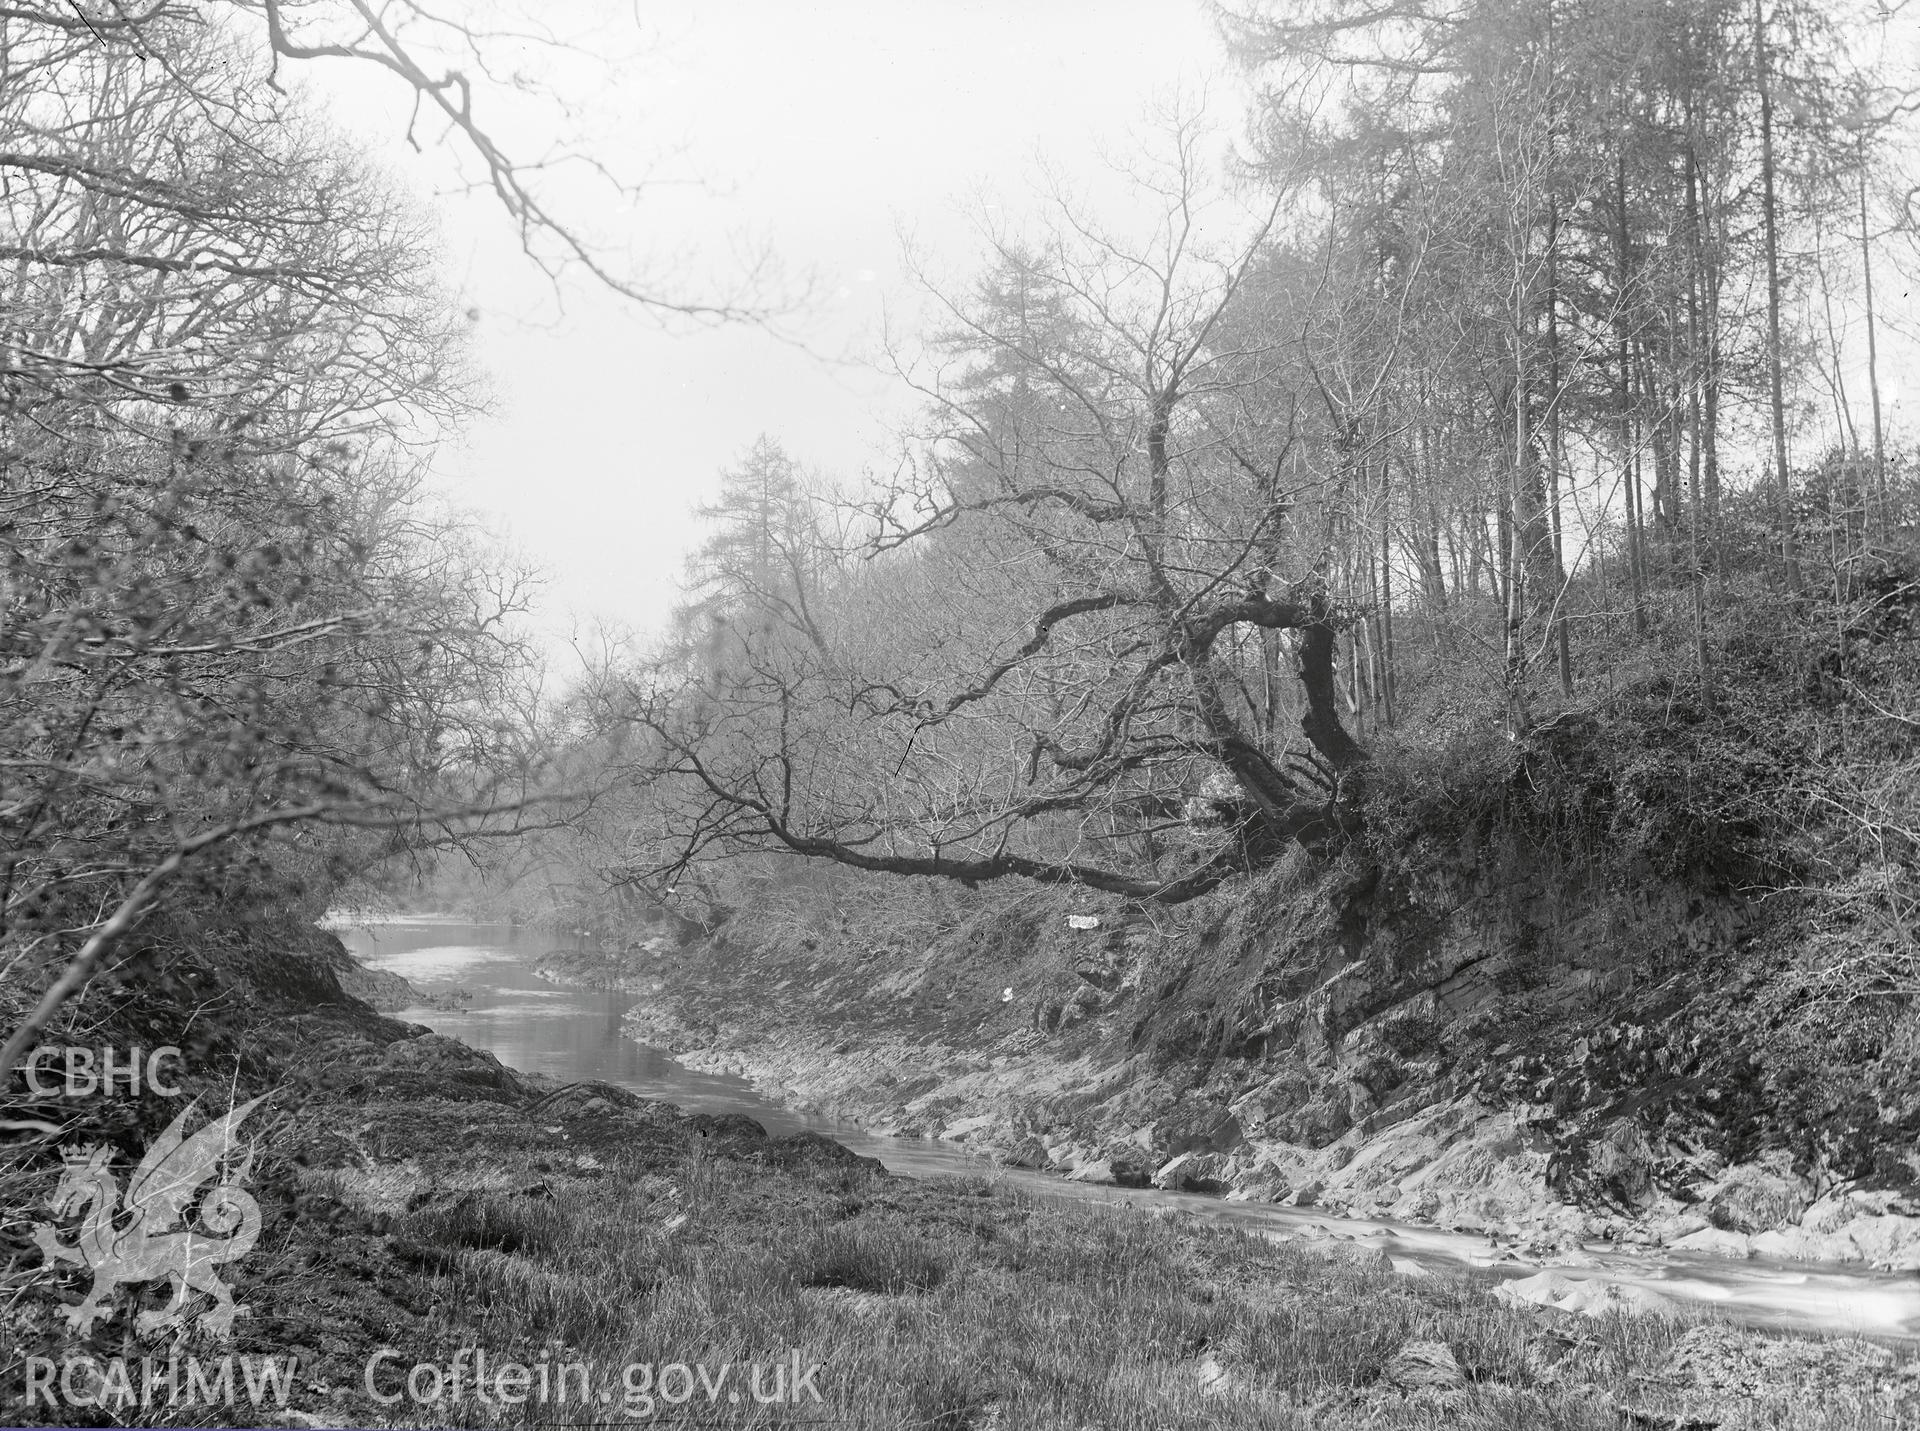 Black and white image dating from c.1910 showing a wooded scene in the Aberystwyth area, taken by Emile T. Evans.